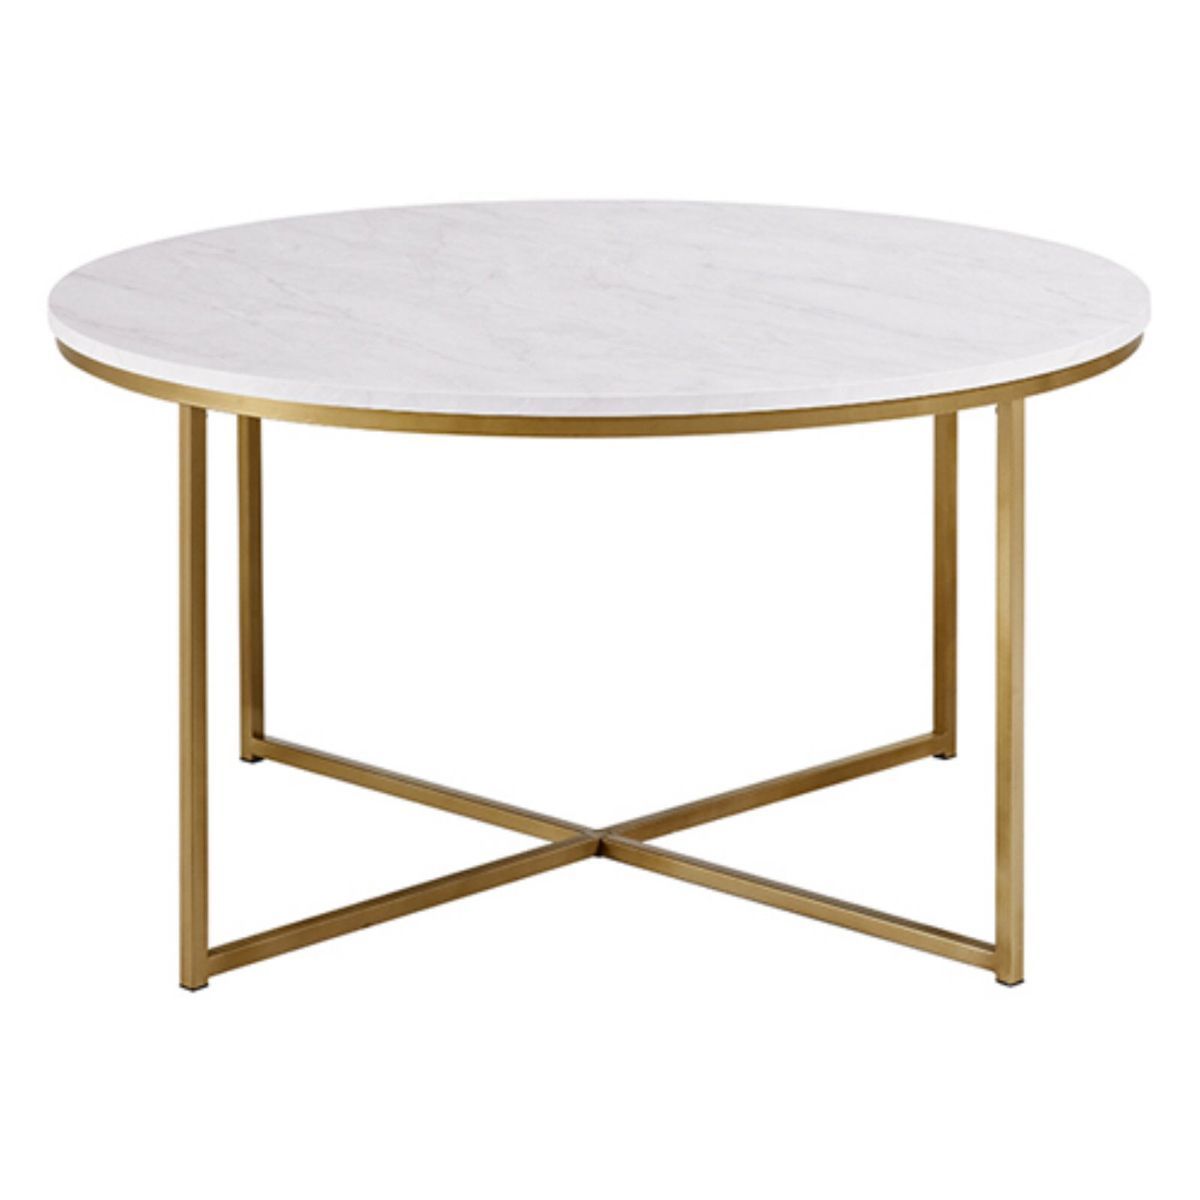 Modern Round White Faux Marble Coffee Table With Gold Base – Walmart Regarding Modern Round Faux Marble Coffee Tables (View 9 of 15)